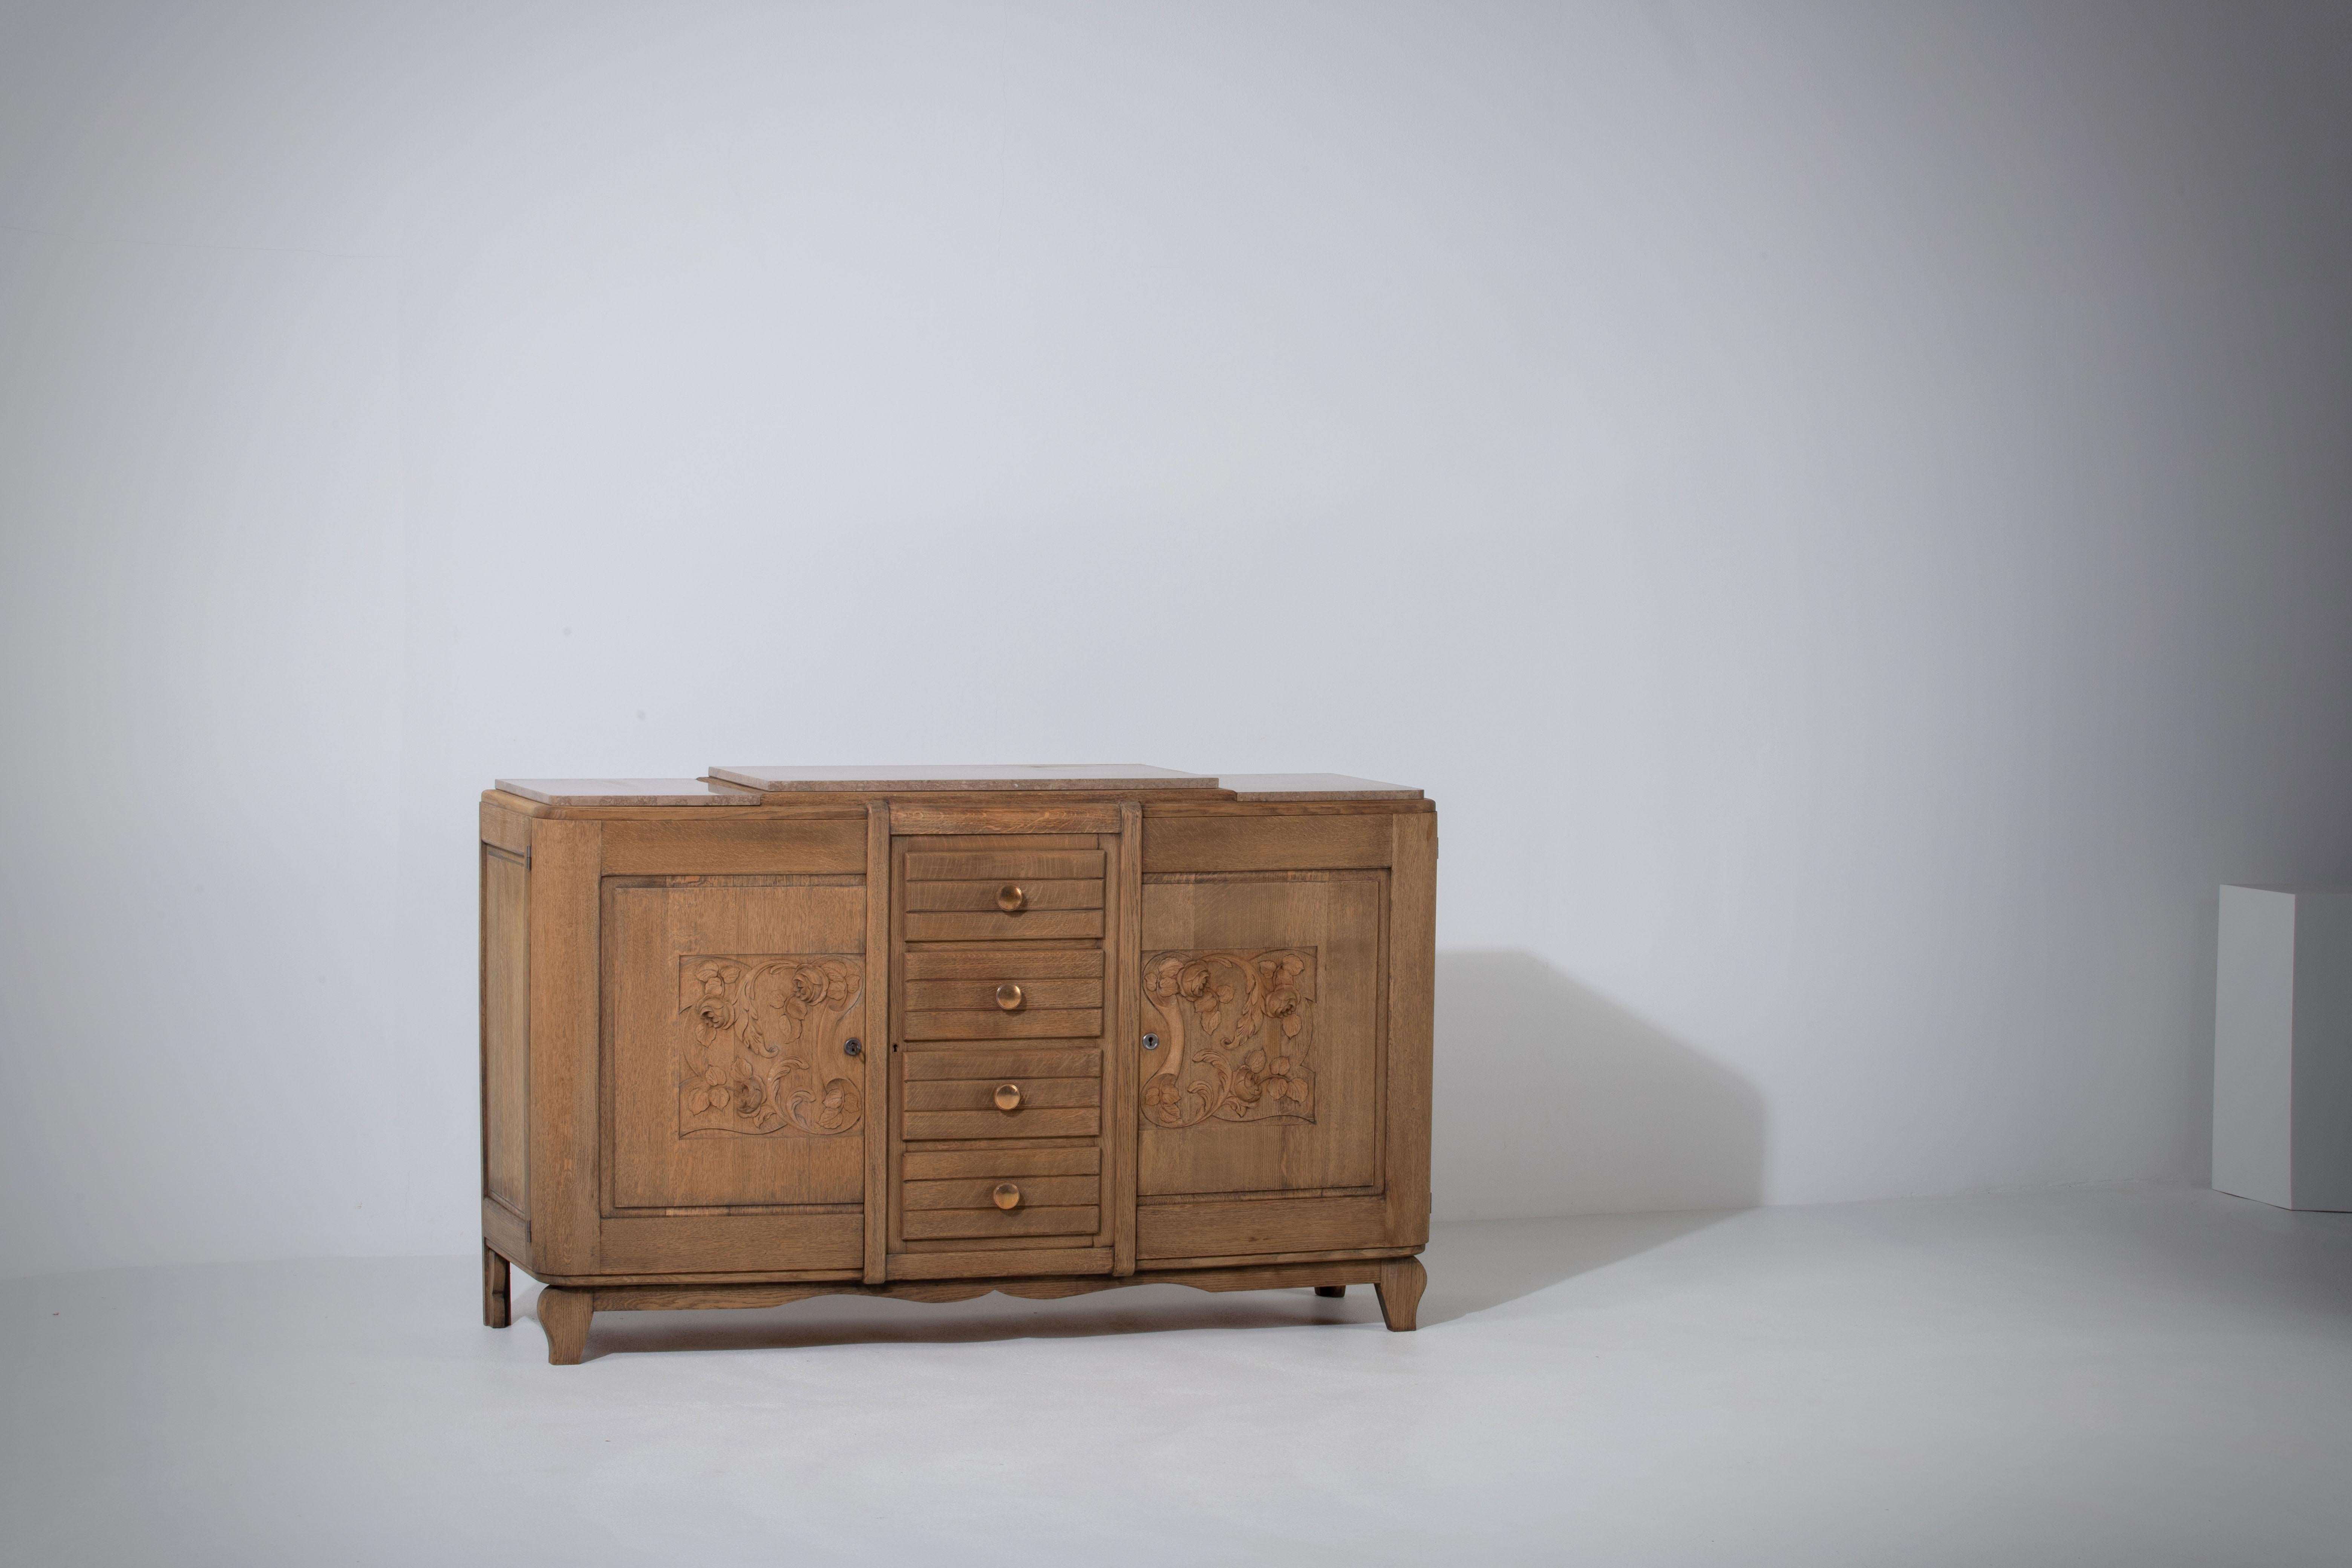 Very elegant credenza in solid oak, France, 1940s.
Art Deco Brutalist sideboard. 
The credenza consists of two storage facilities covered with hand carved designed doors and in the center a drawers column.
The refined wooden structures on the